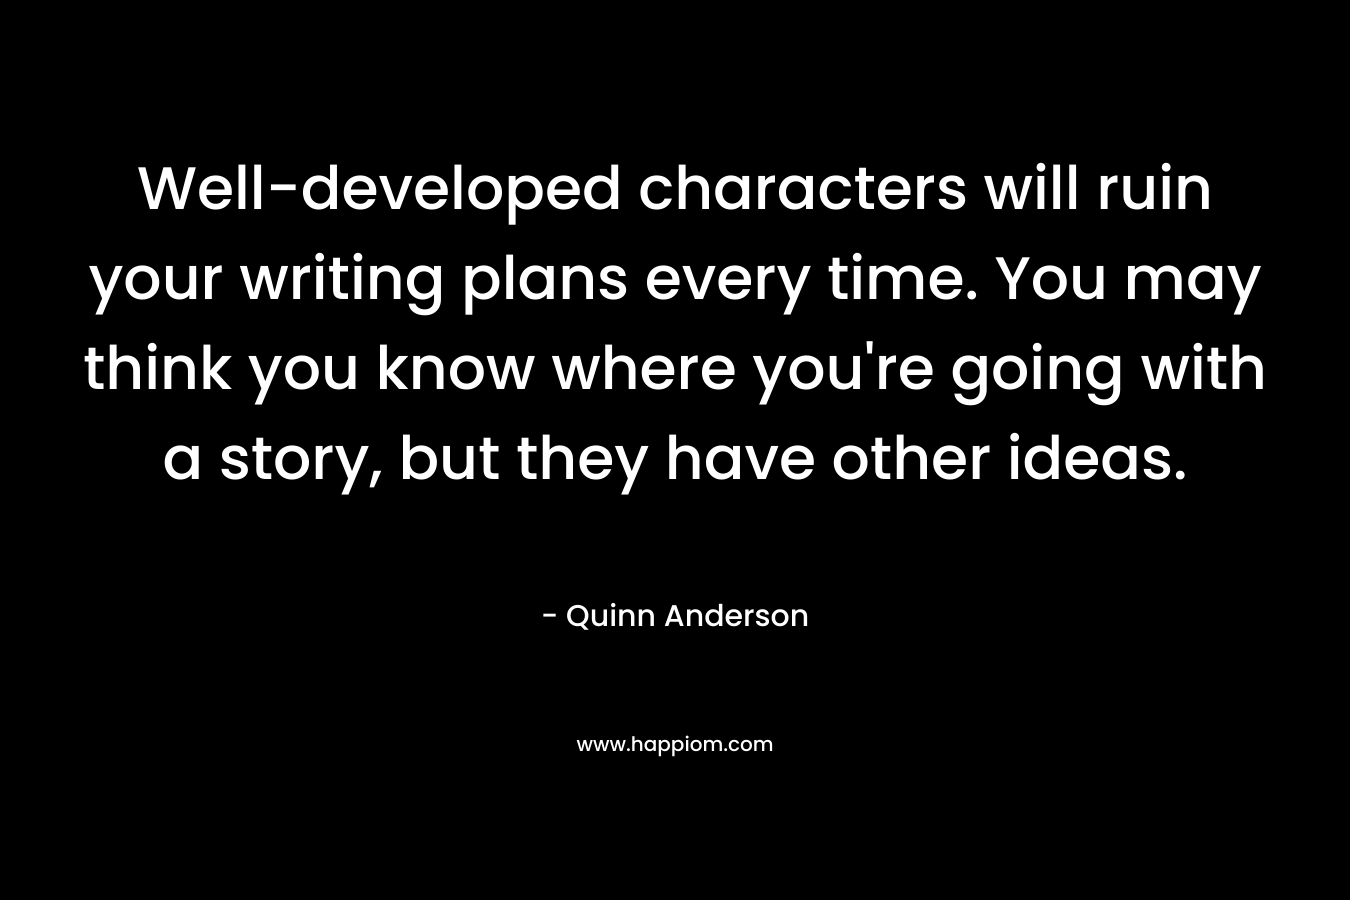 Well-developed characters will ruin your writing plans every time. You may think you know where you’re going with a story, but they have other ideas. – Quinn Anderson